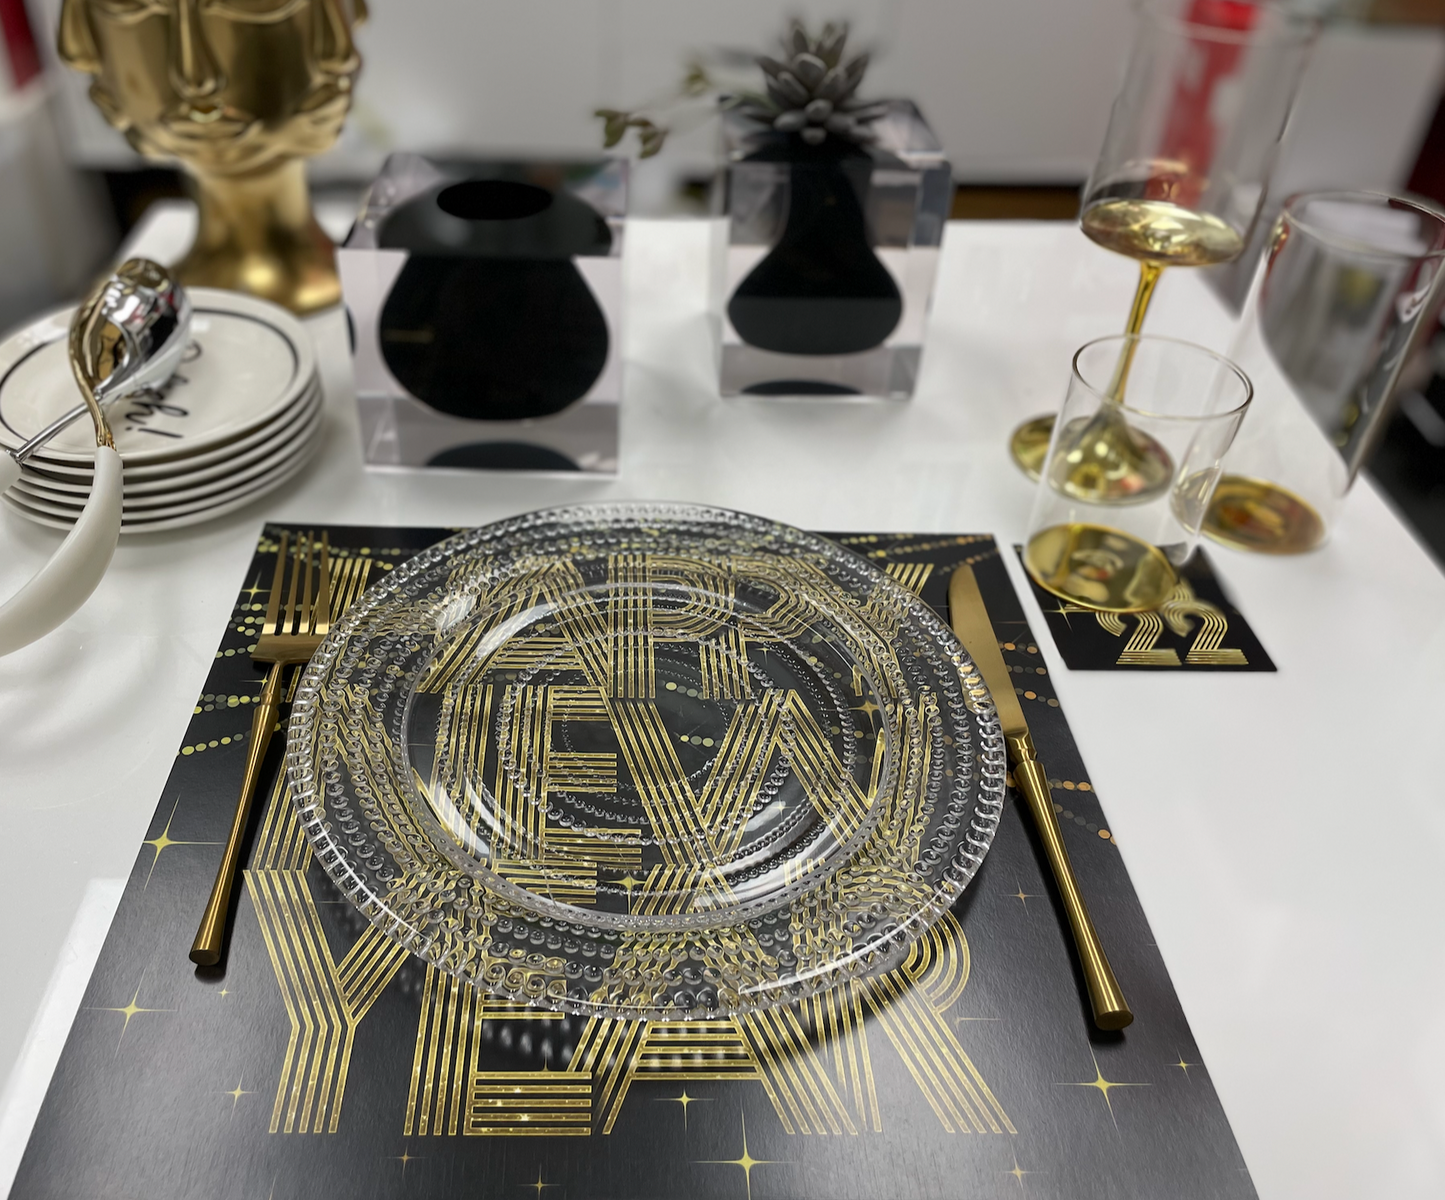 NEW YEAR'S EVE PAPER PLACEMAT